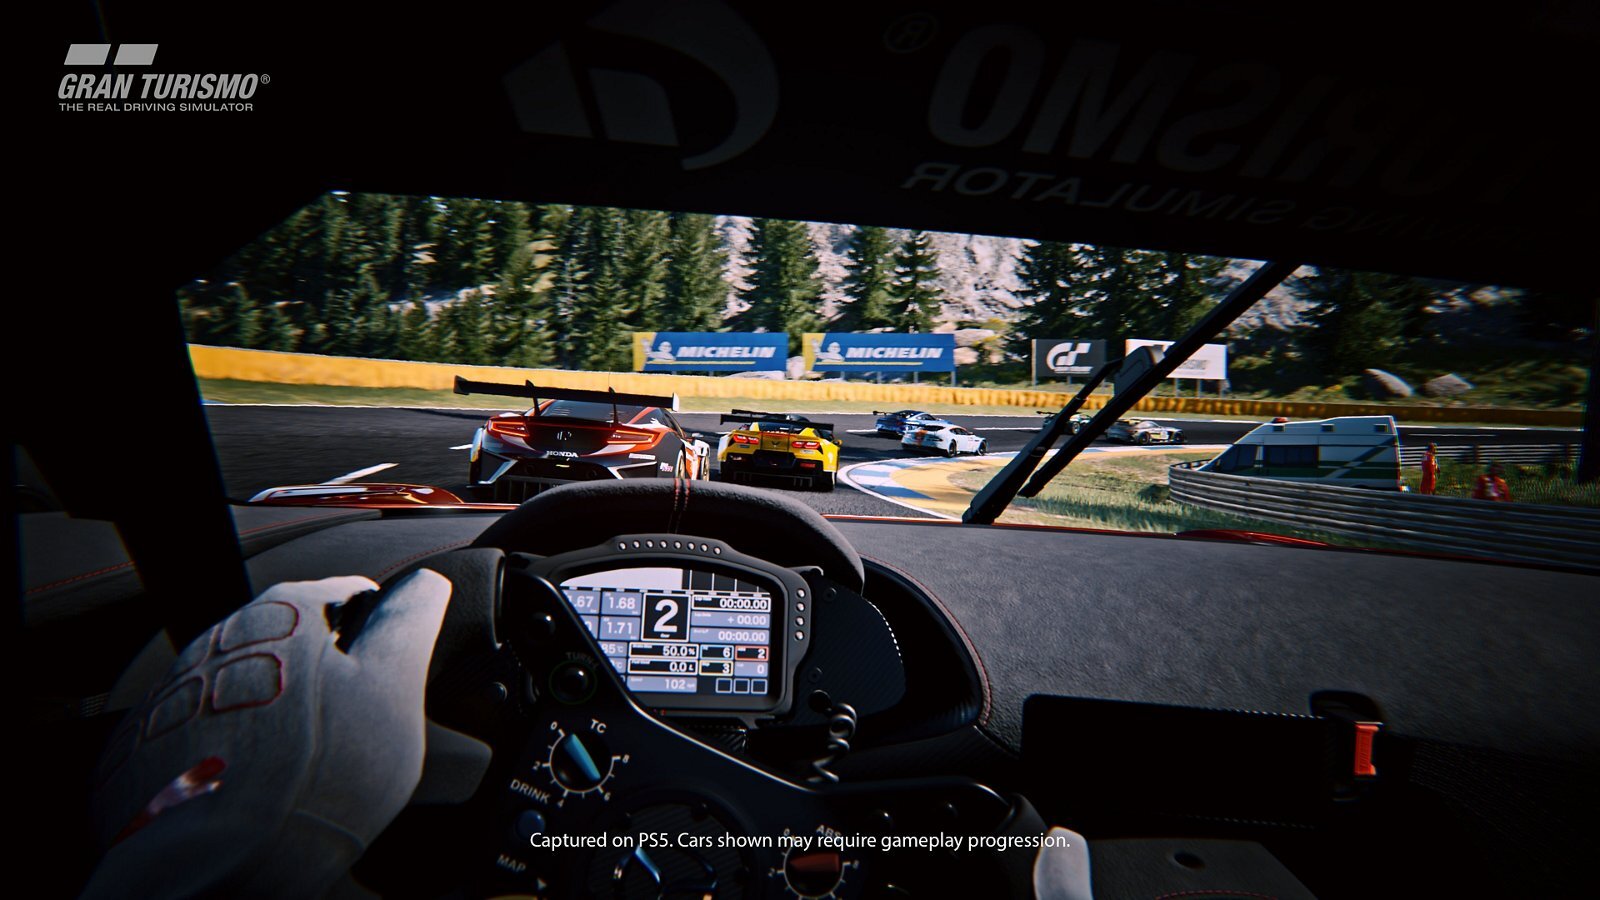 Gran Turismo 7 first-person view from behind the wheel of a car